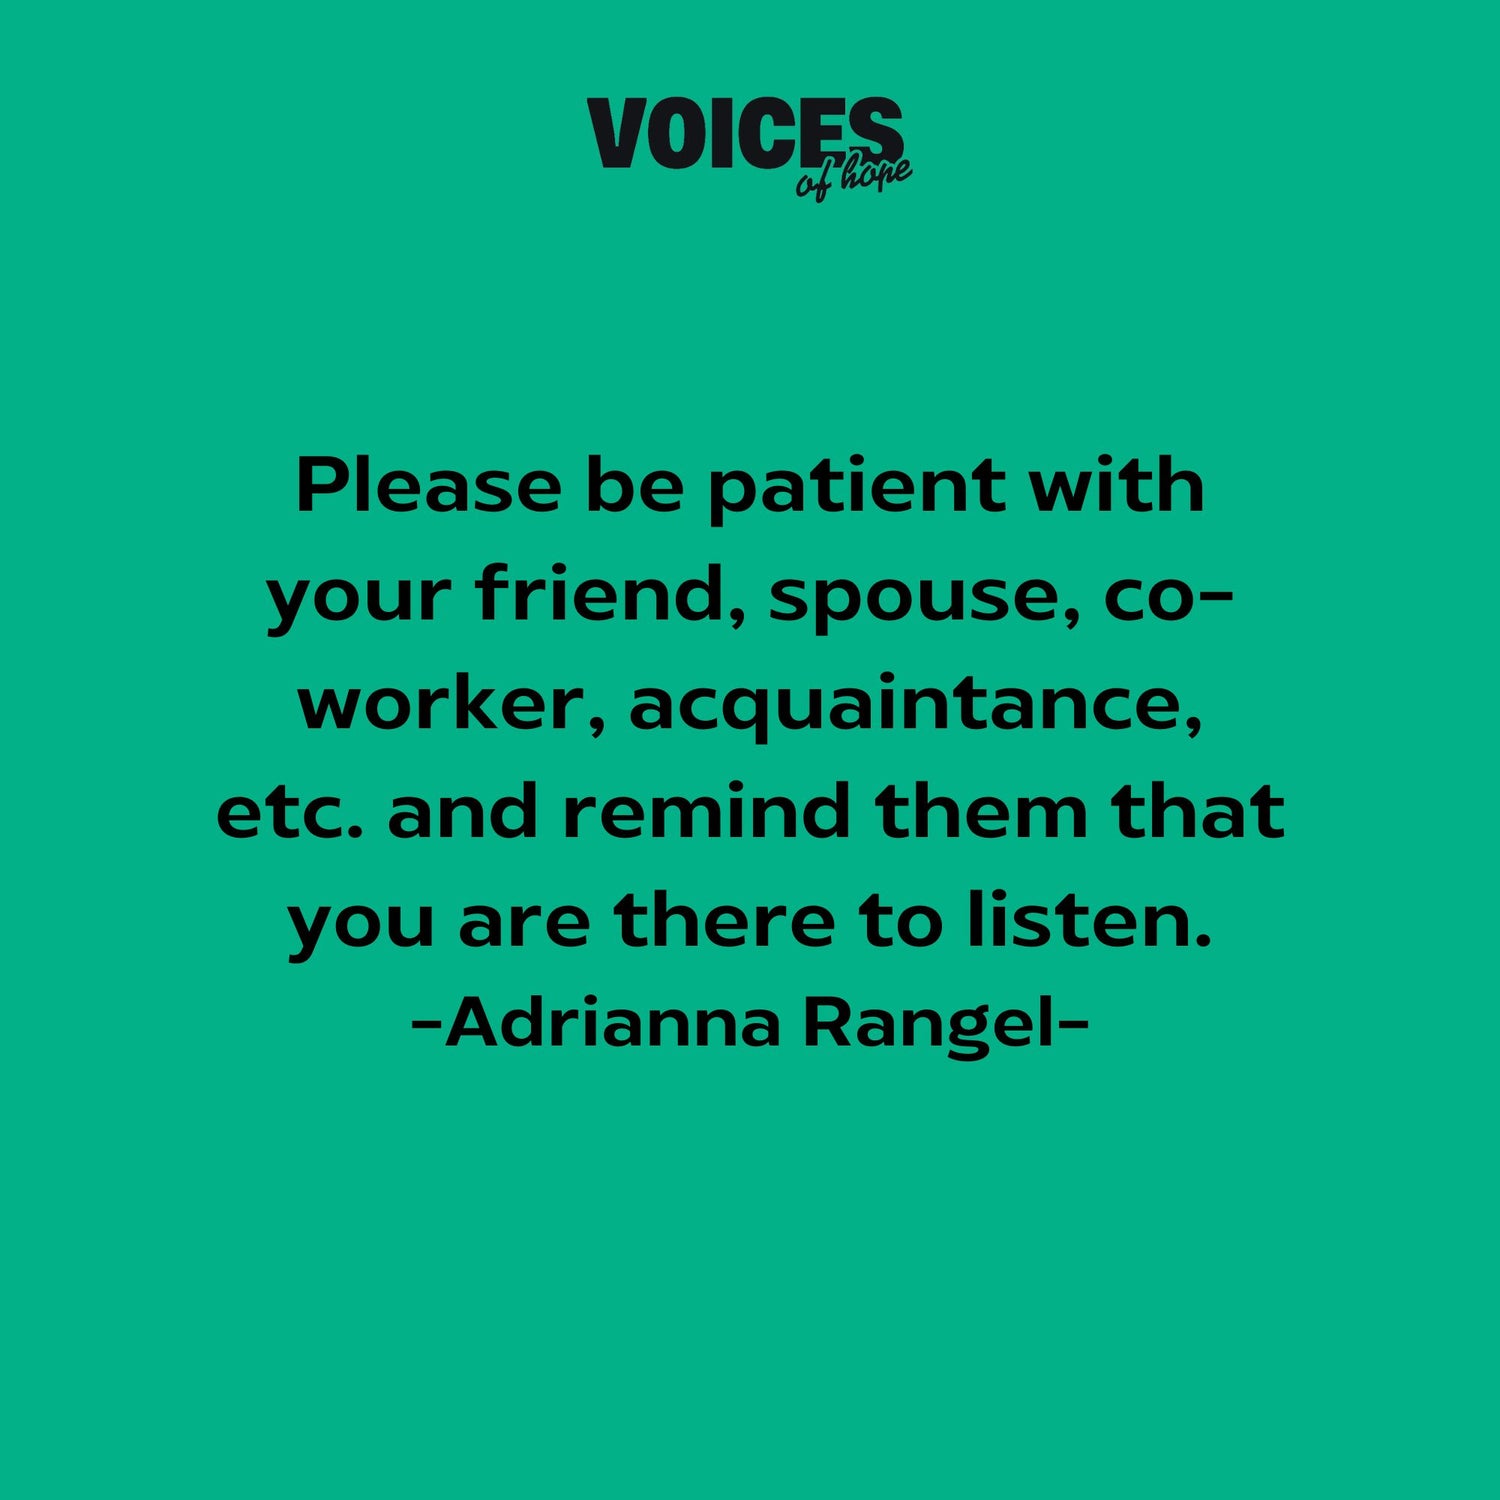 Green background with black writing that reads: "please be patient with your friend, spouse, co-worker, acquaintance, etc, and remind them that you are there to listen. Adrianna Rangel."